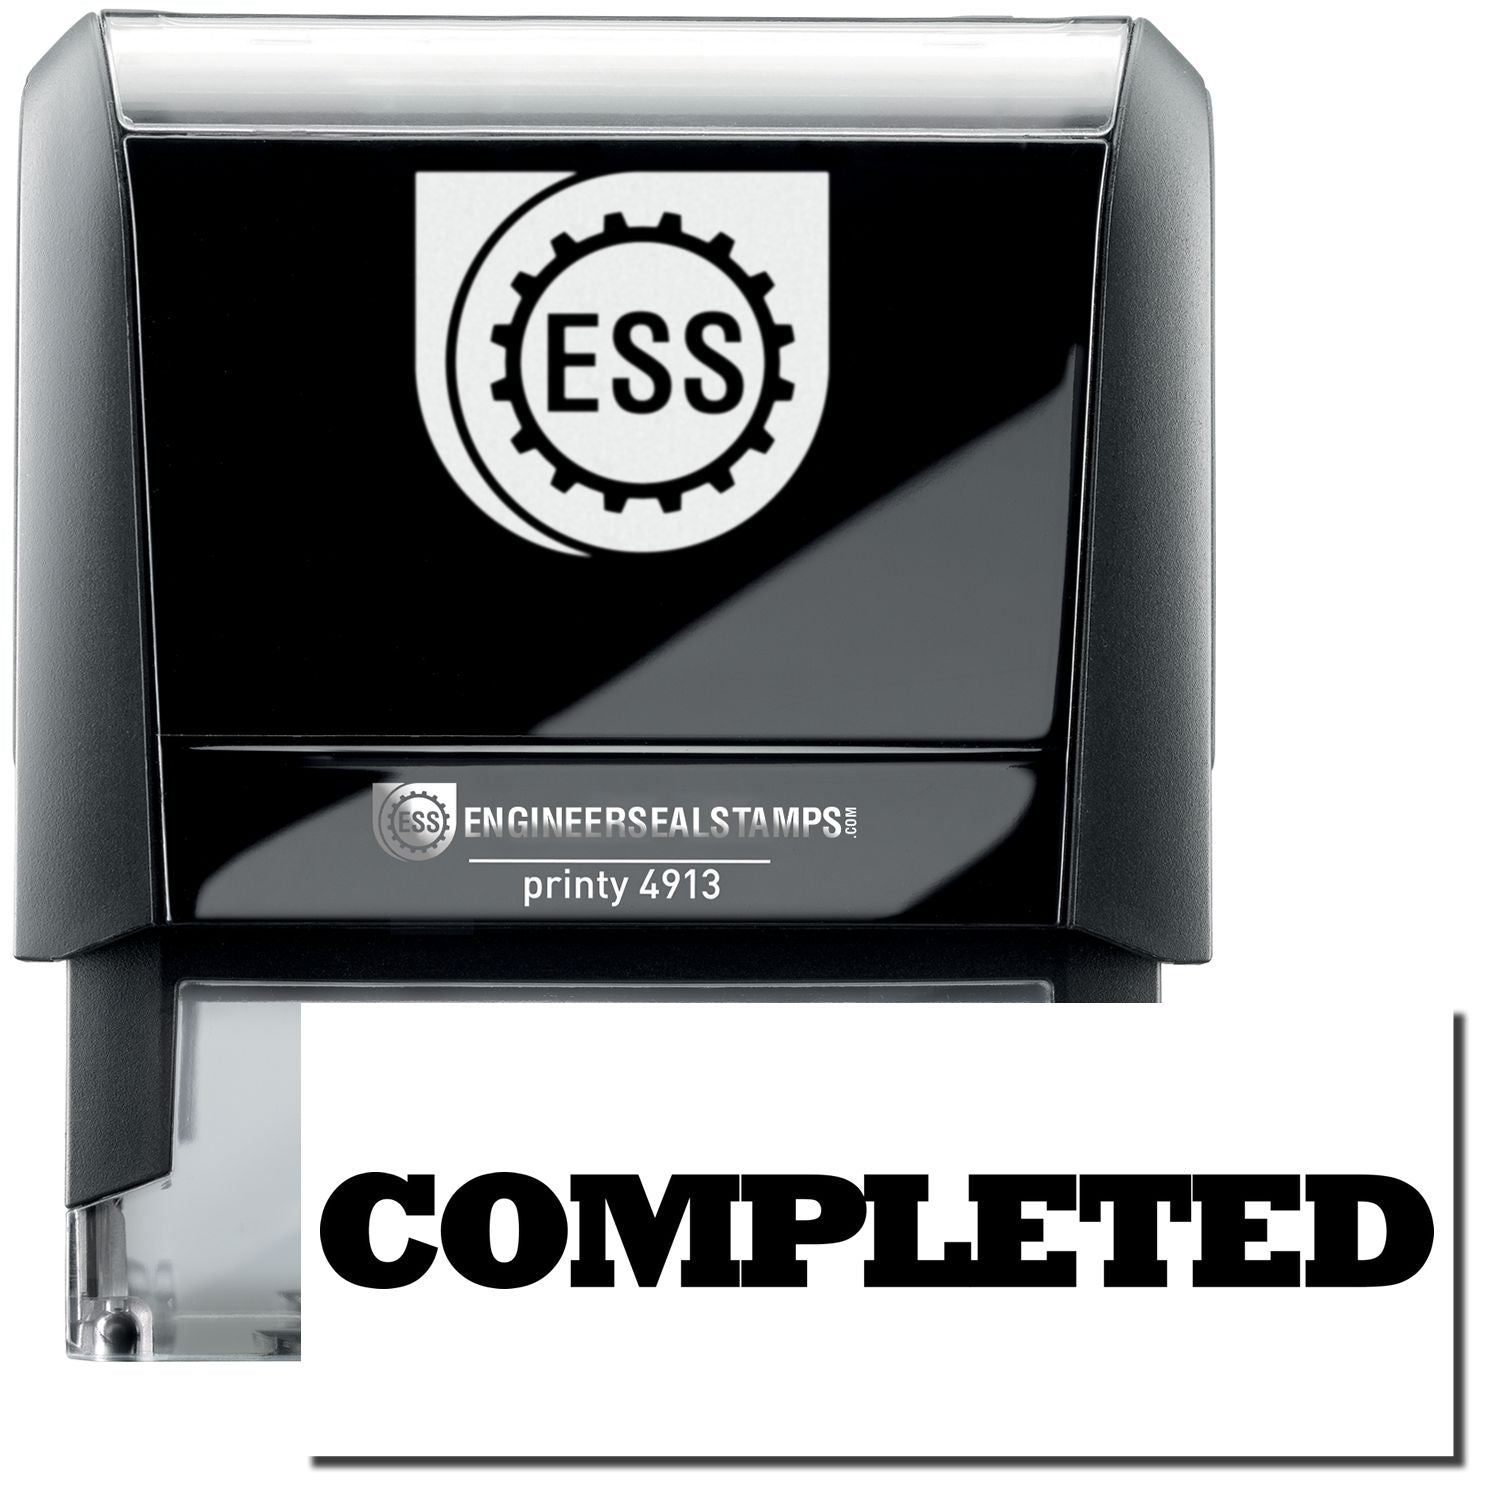 A self-inking stamp with a stamped image showing how the text "COMPLETED" in a large bold font is displayed by it after stamping.